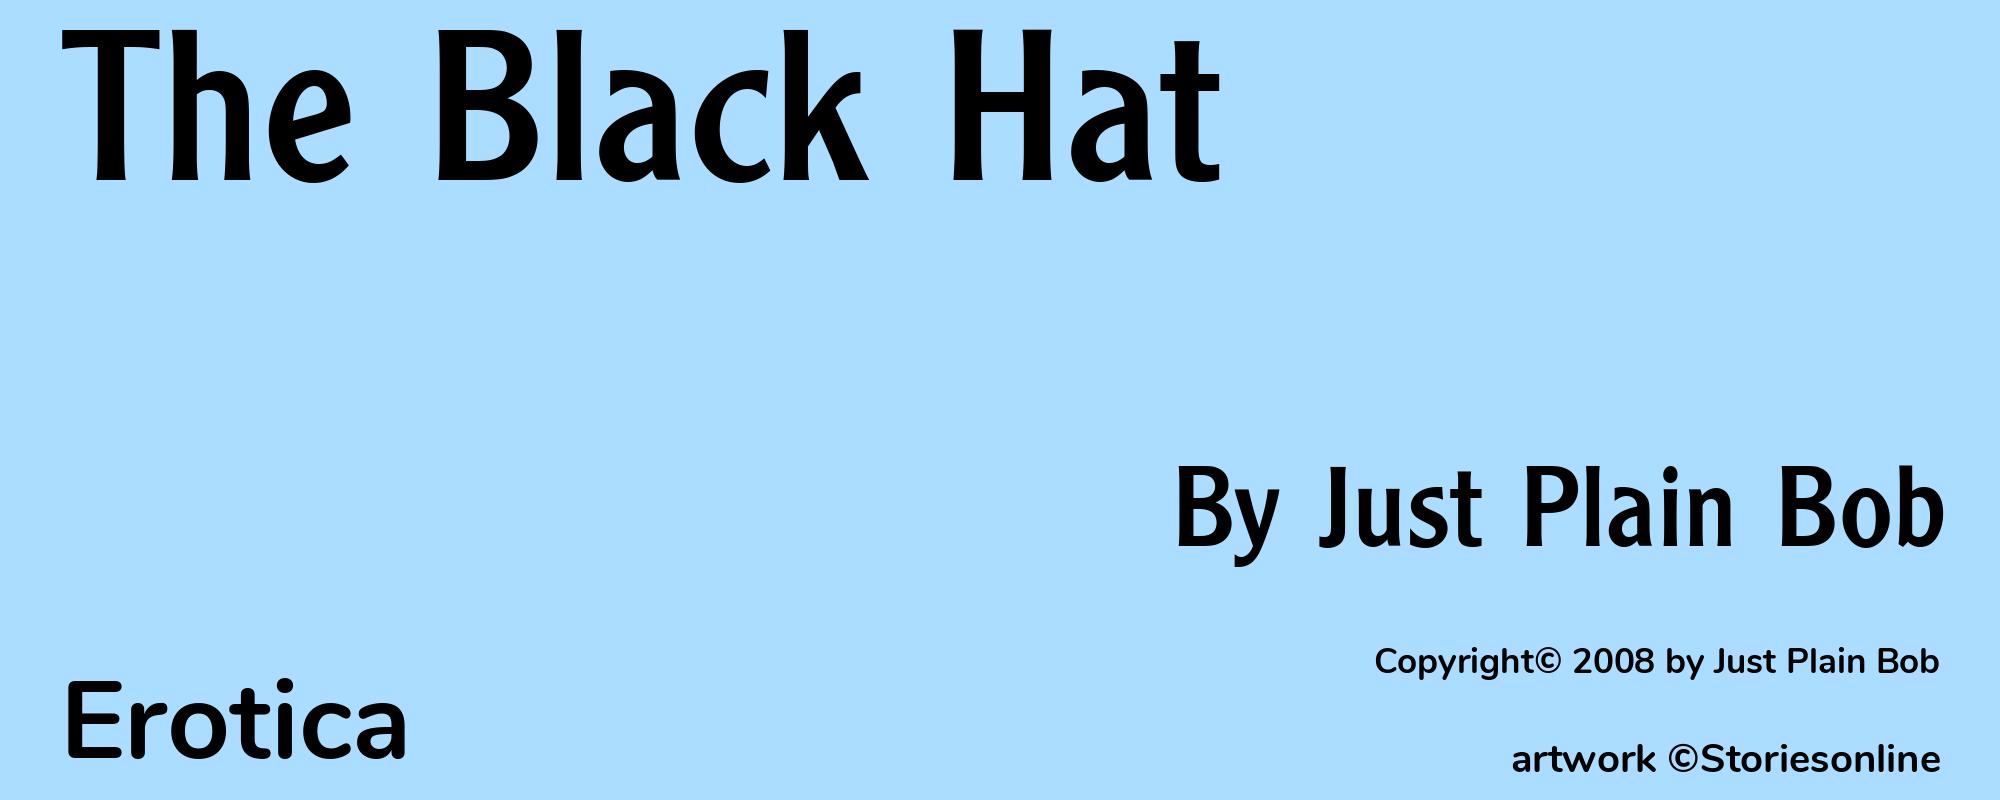 The Black Hat - Cover